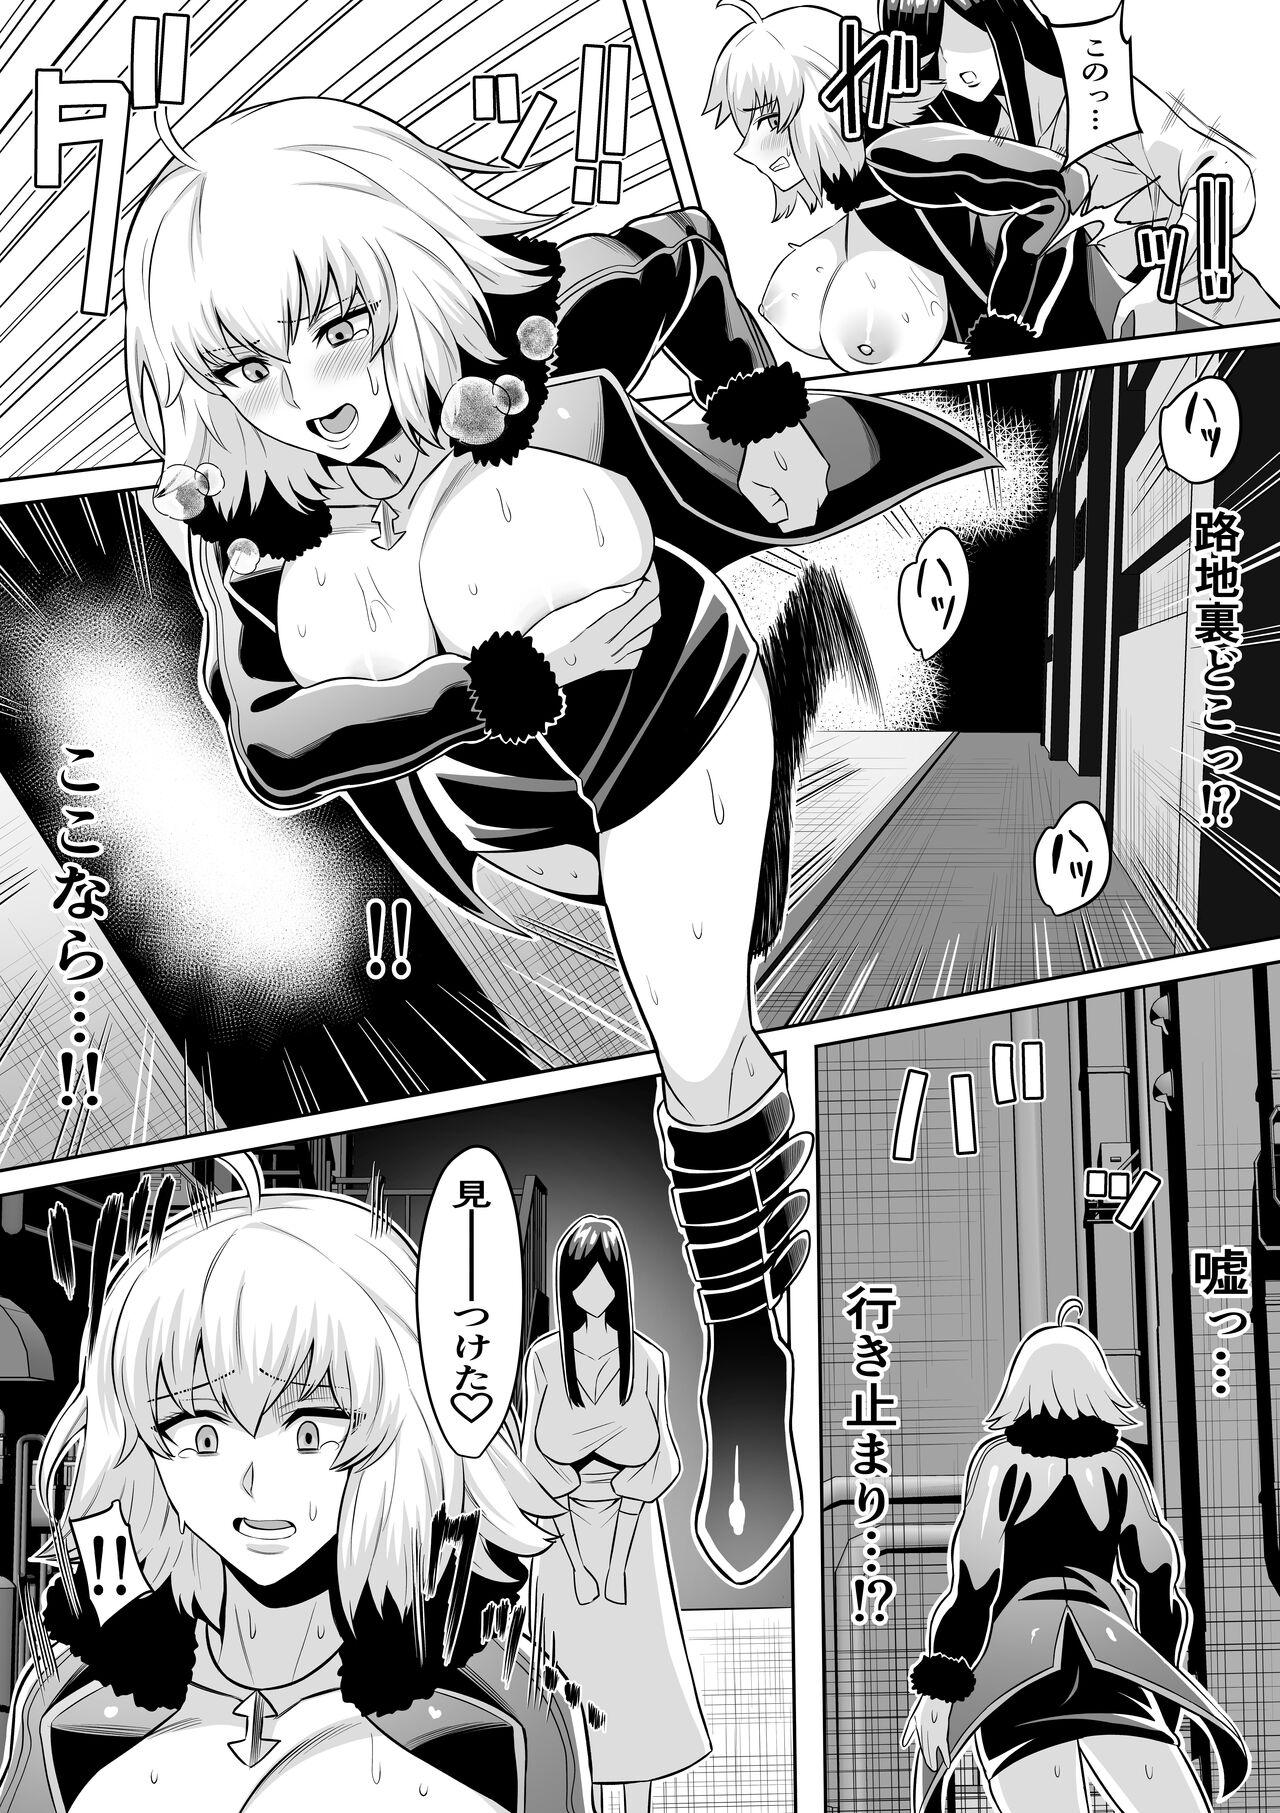 Sis ジャンヌオルタ - Fate grand order Sologirl - Page 7